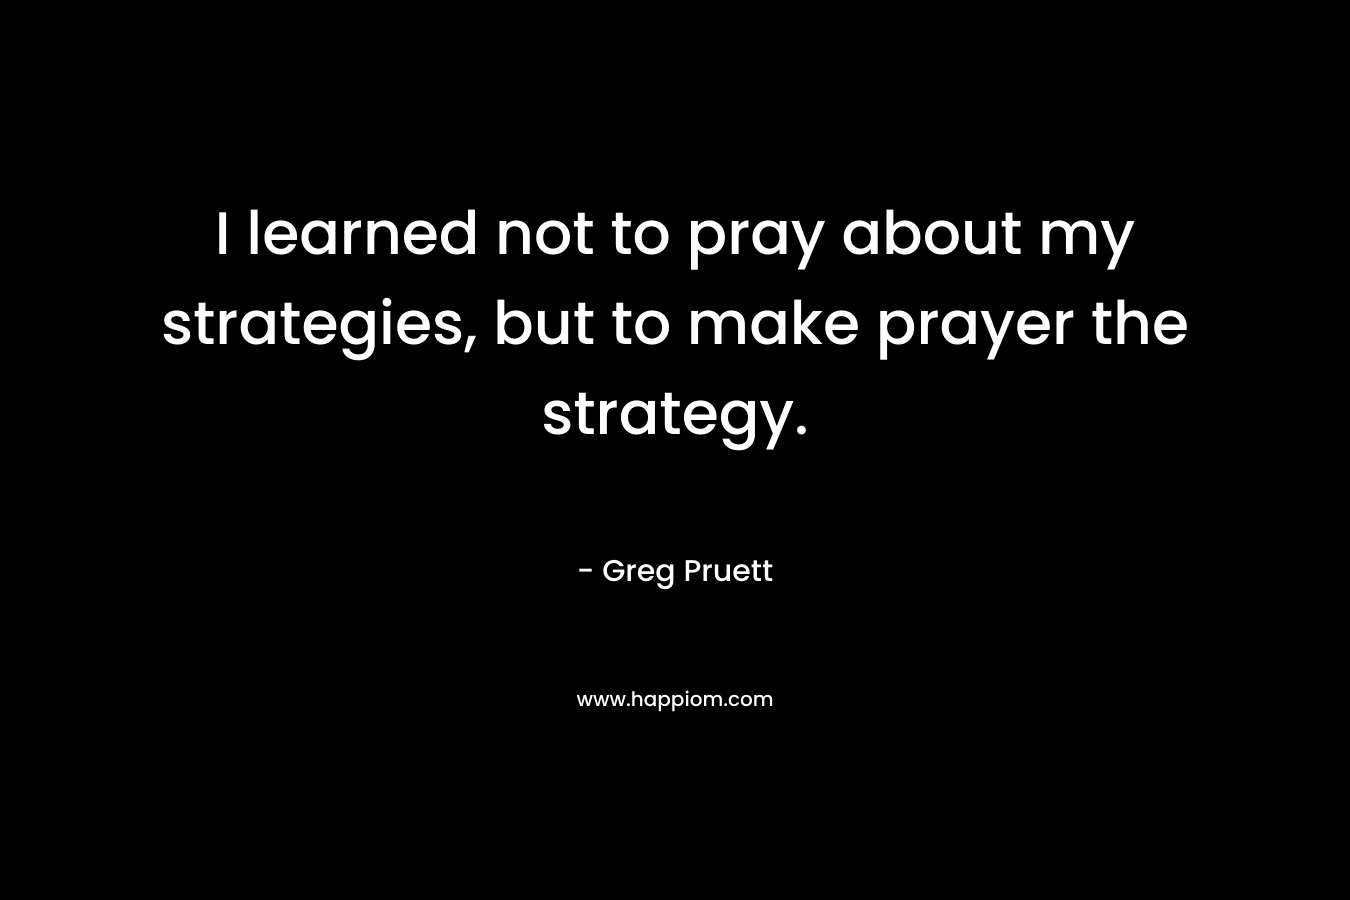 I learned not to pray about my strategies, but to make prayer the strategy.